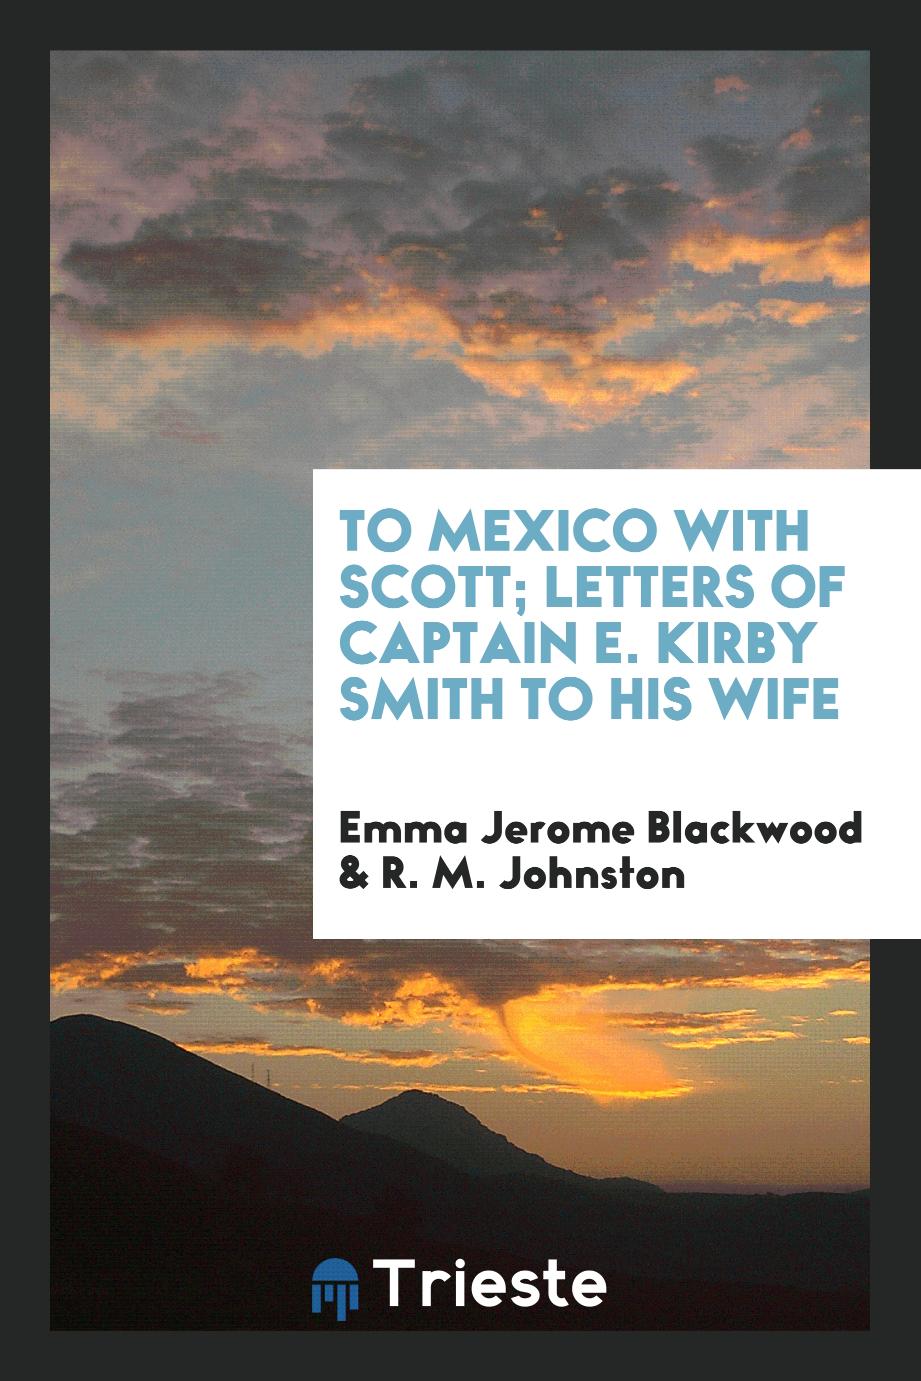 To Mexico with Scott; letters of Captain E. Kirby Smith to his wife